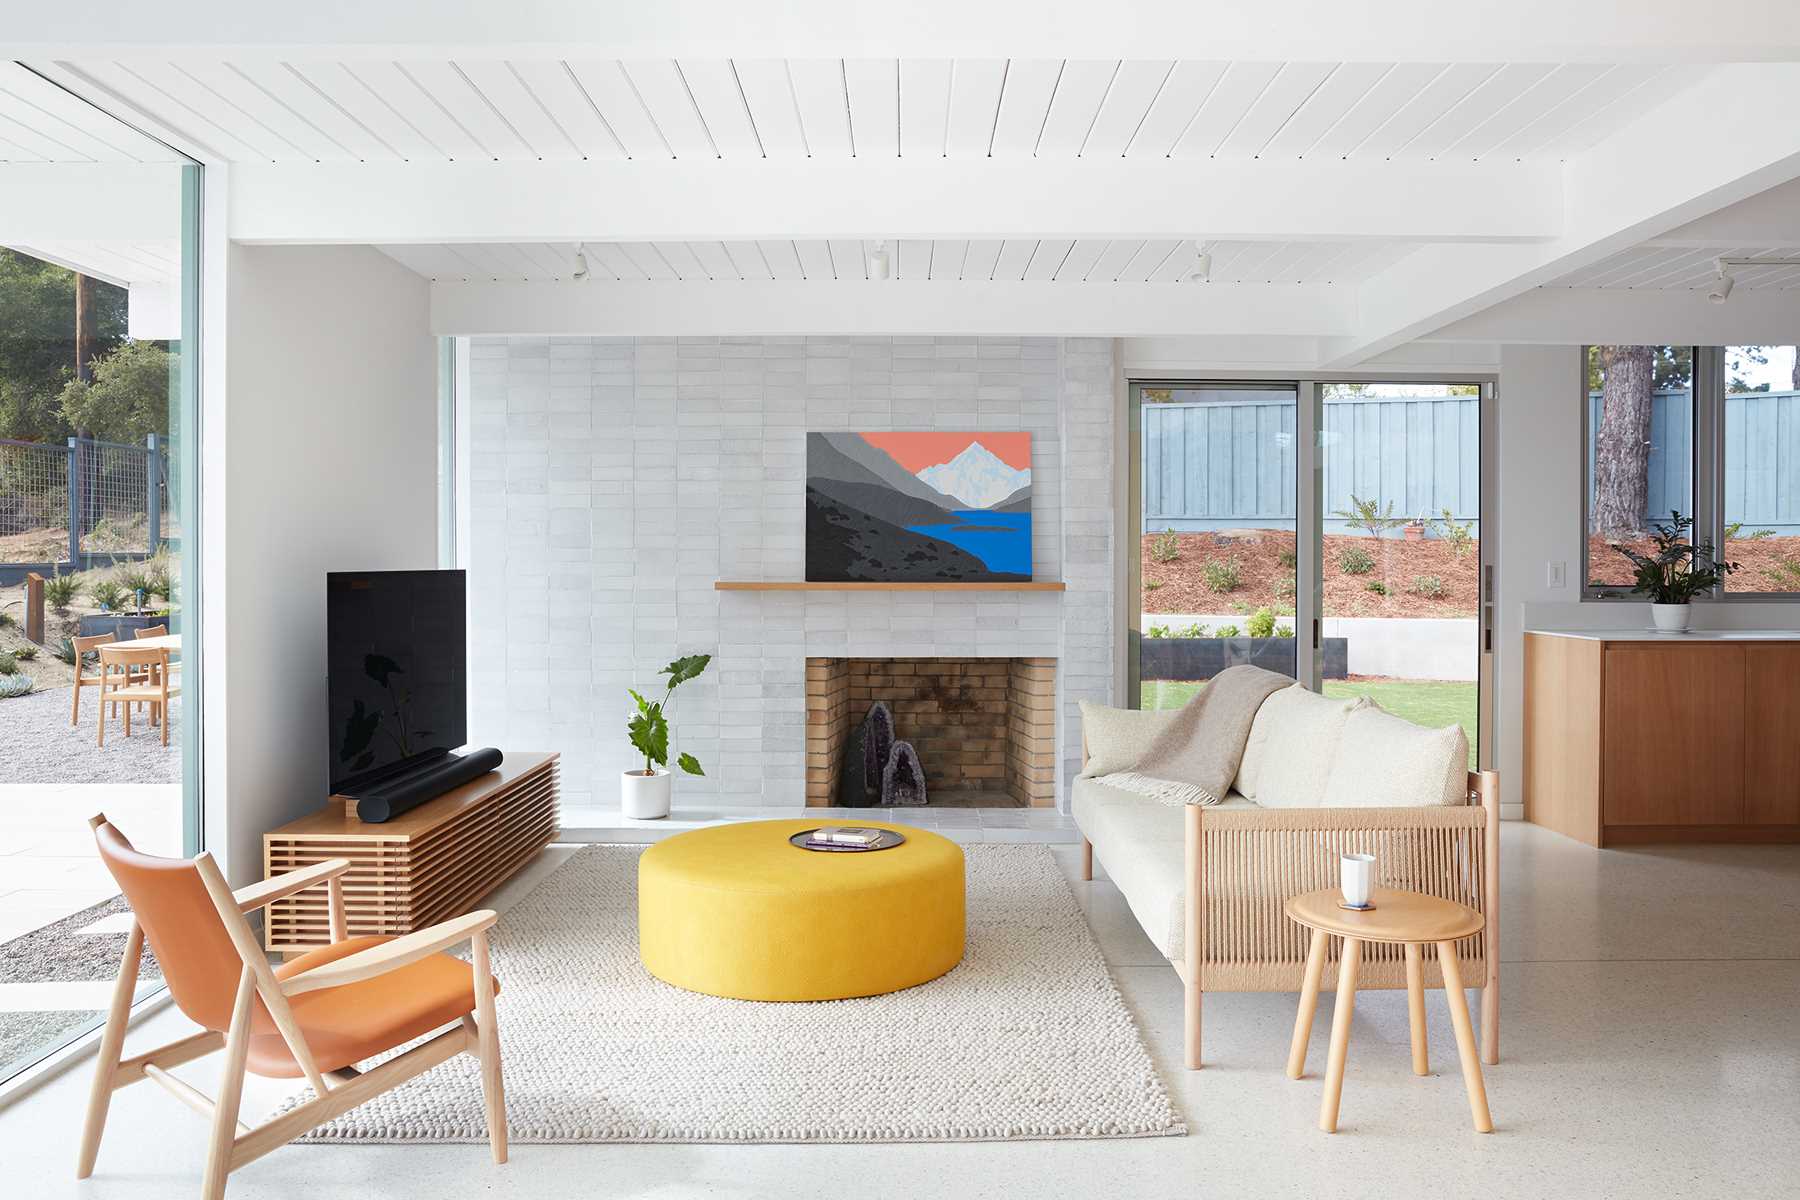 A remodeled Eichler home with a fireplace.